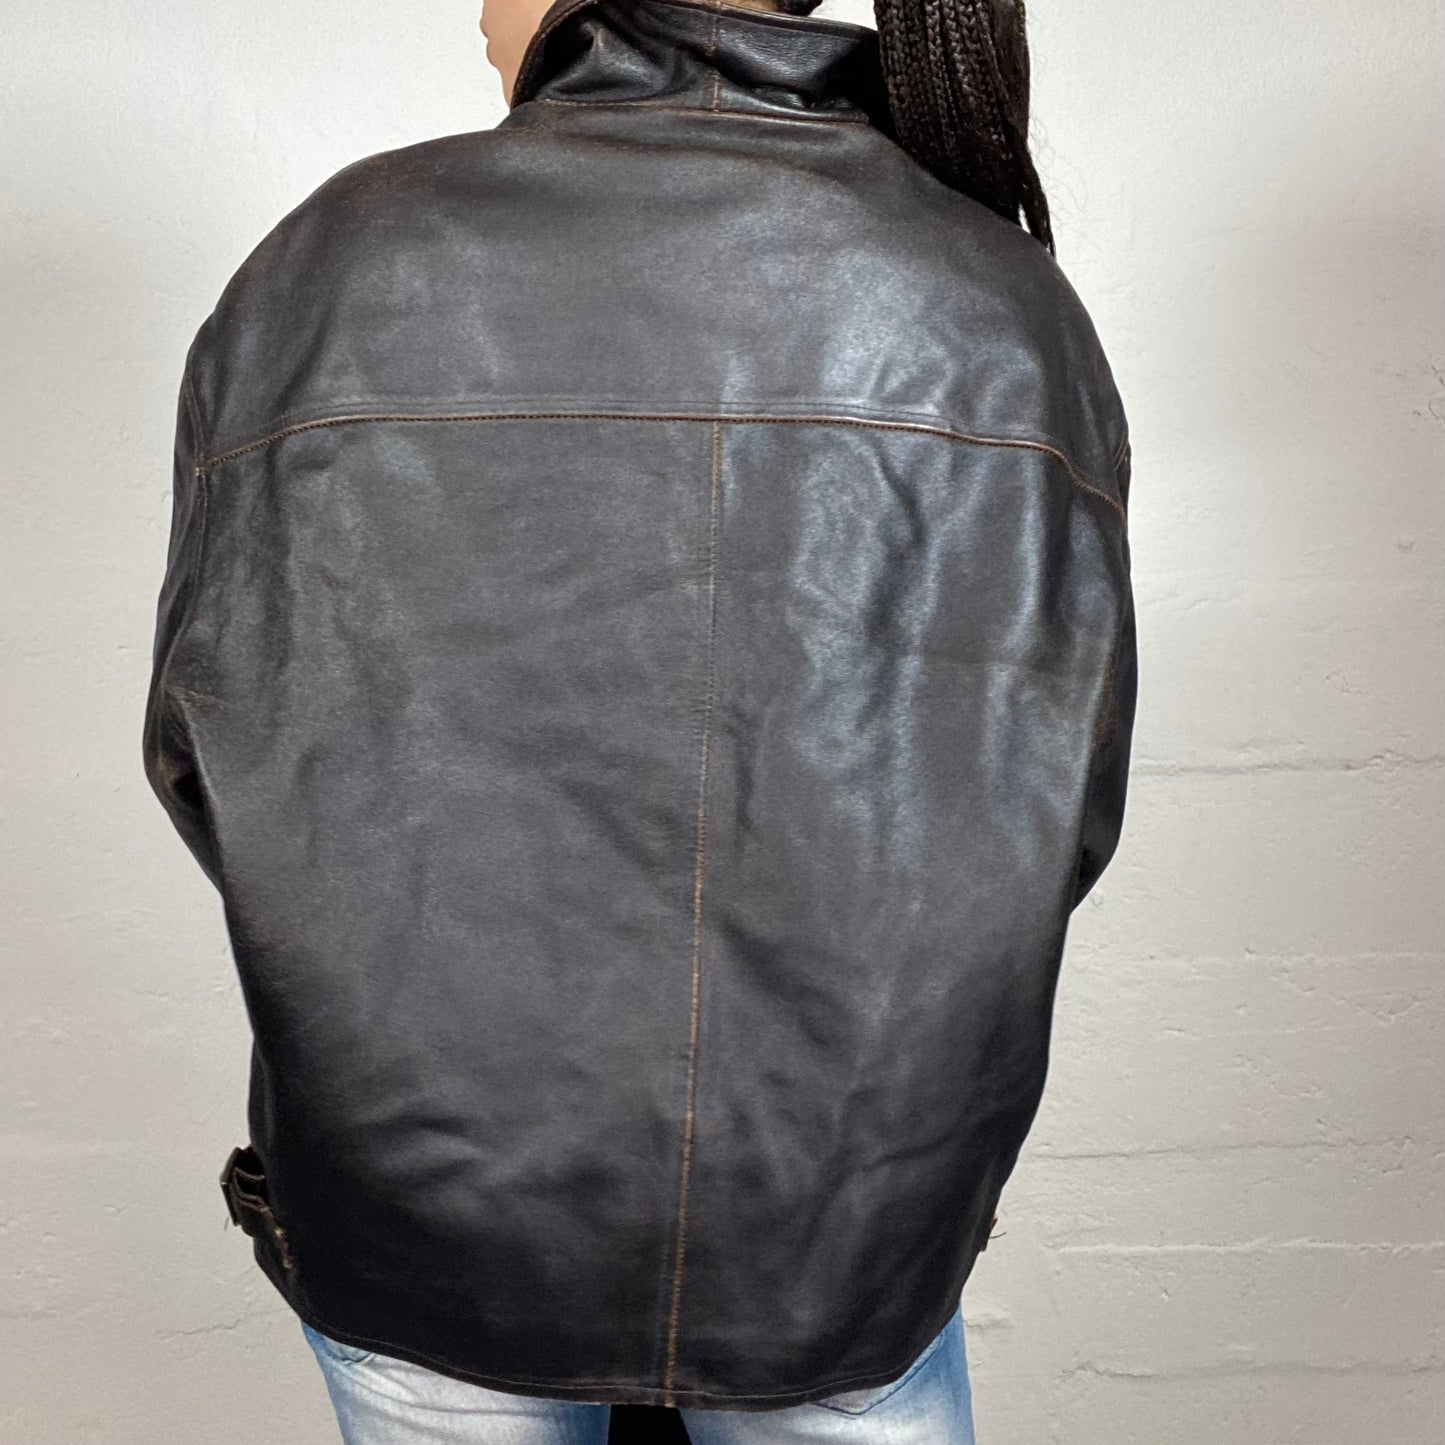 Vintage 2000's Biker Girl Brown Leather Faded Colour Zip Up Bomber Jacket with Zipped Pockets (L)